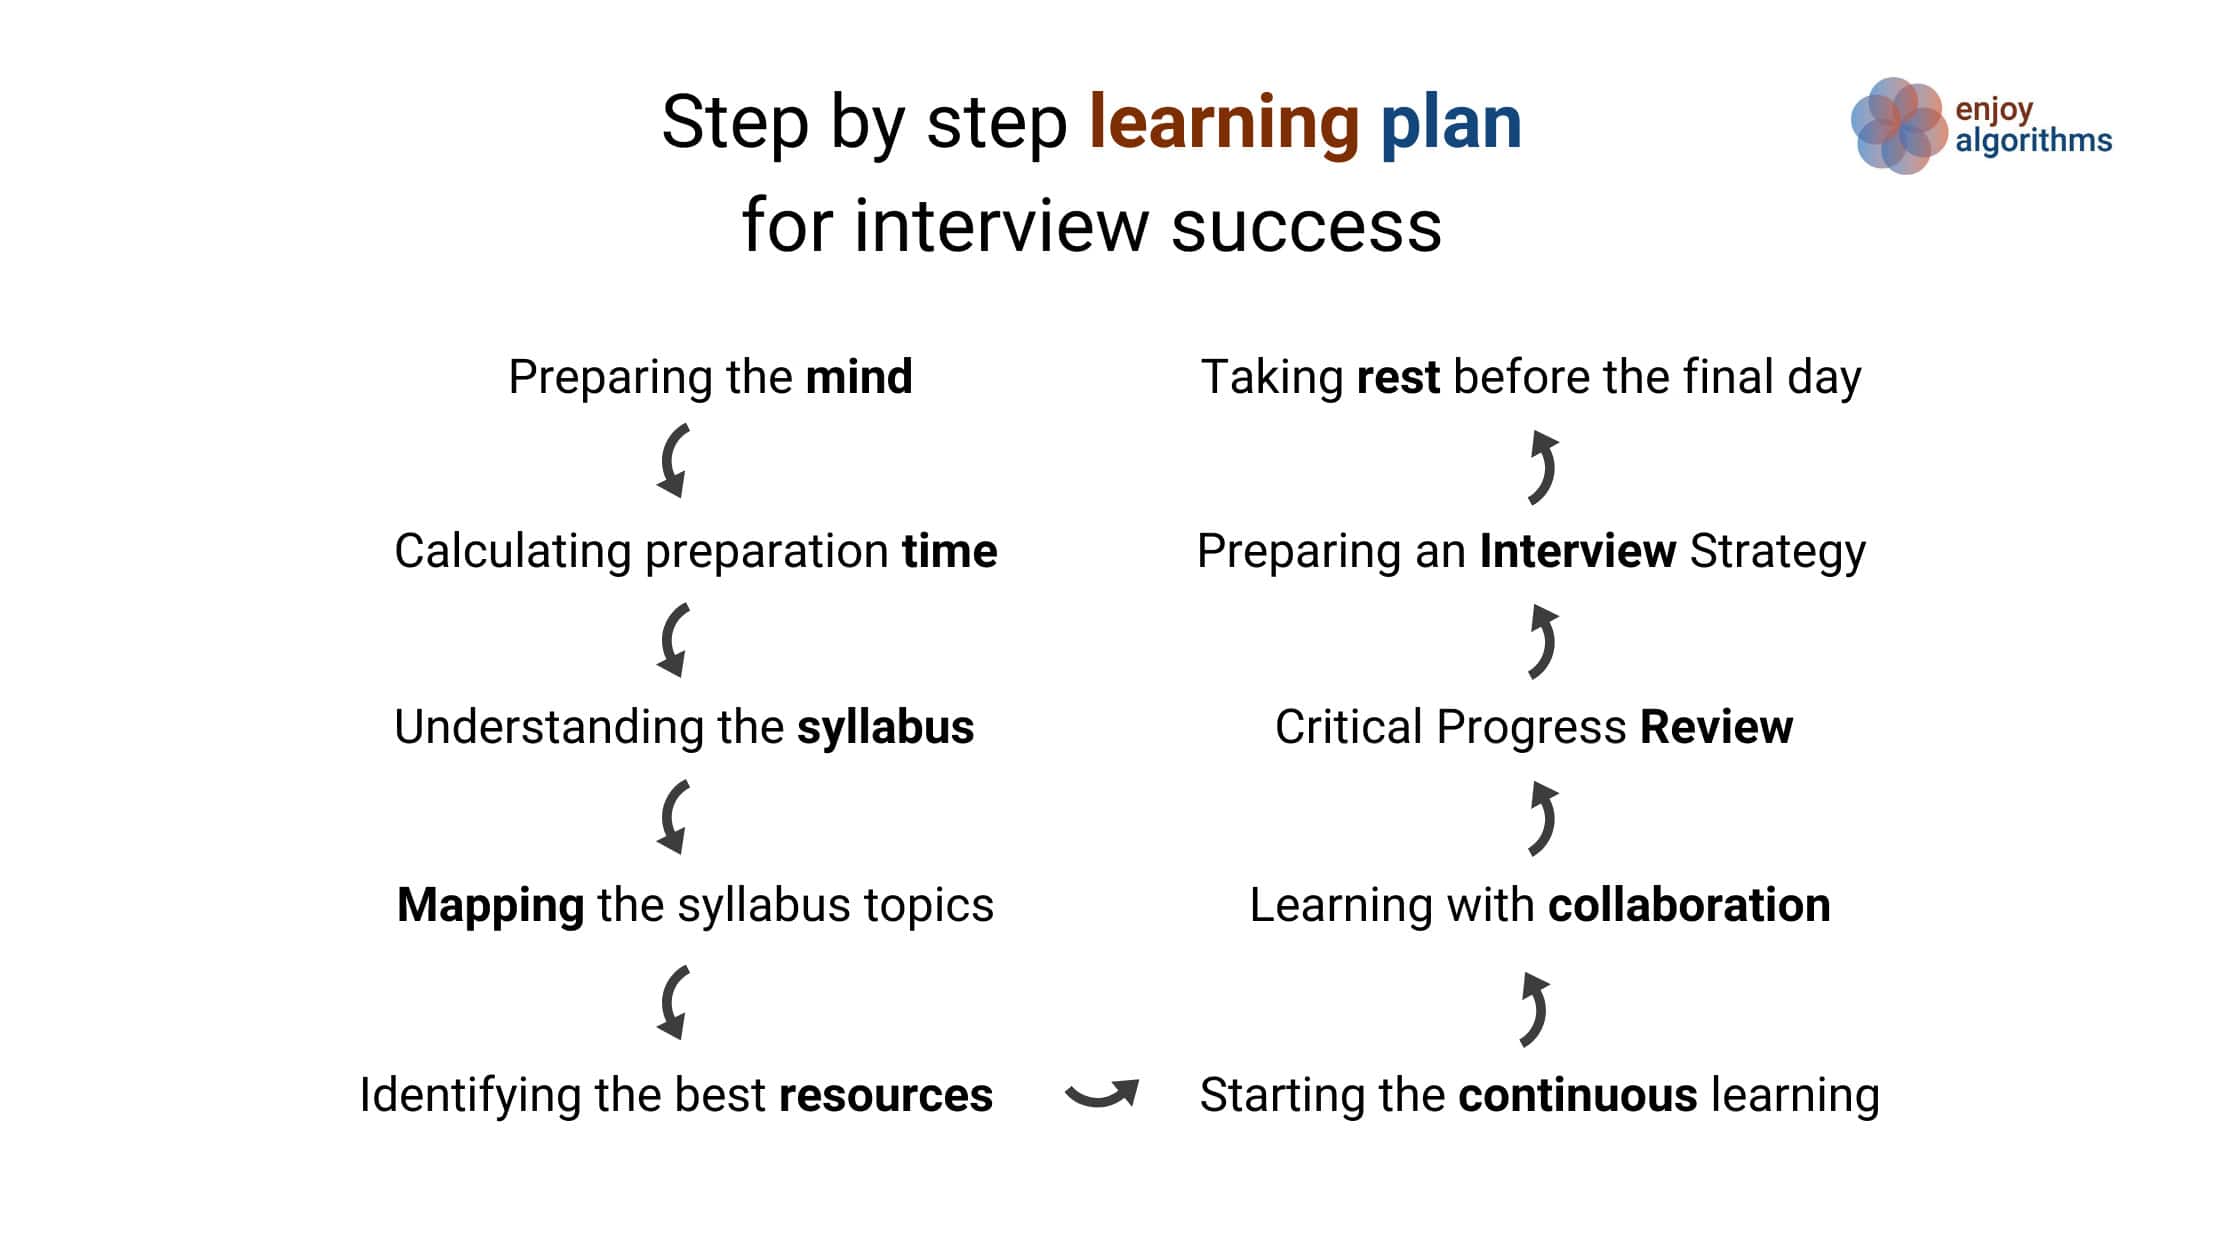 Step by Step Learning Plan for Coding Interview